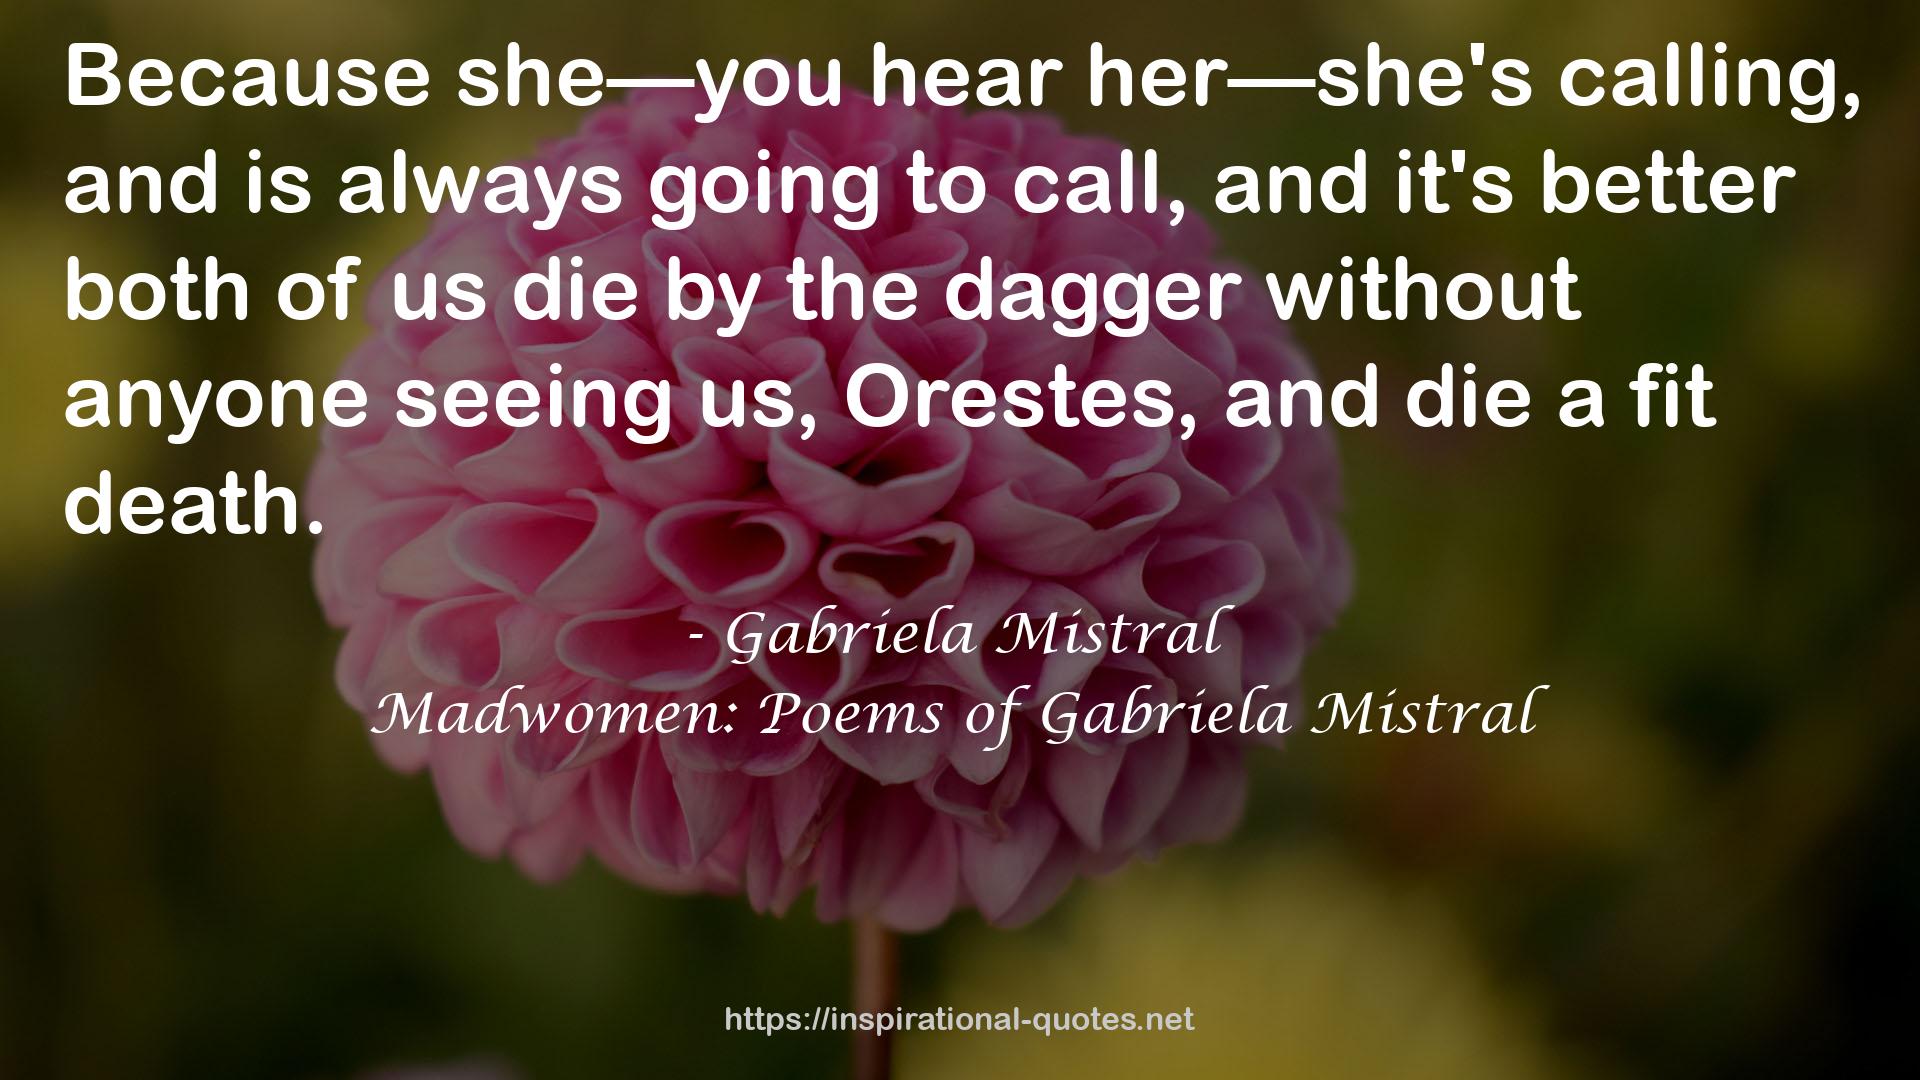 Madwomen: Poems of Gabriela Mistral QUOTES